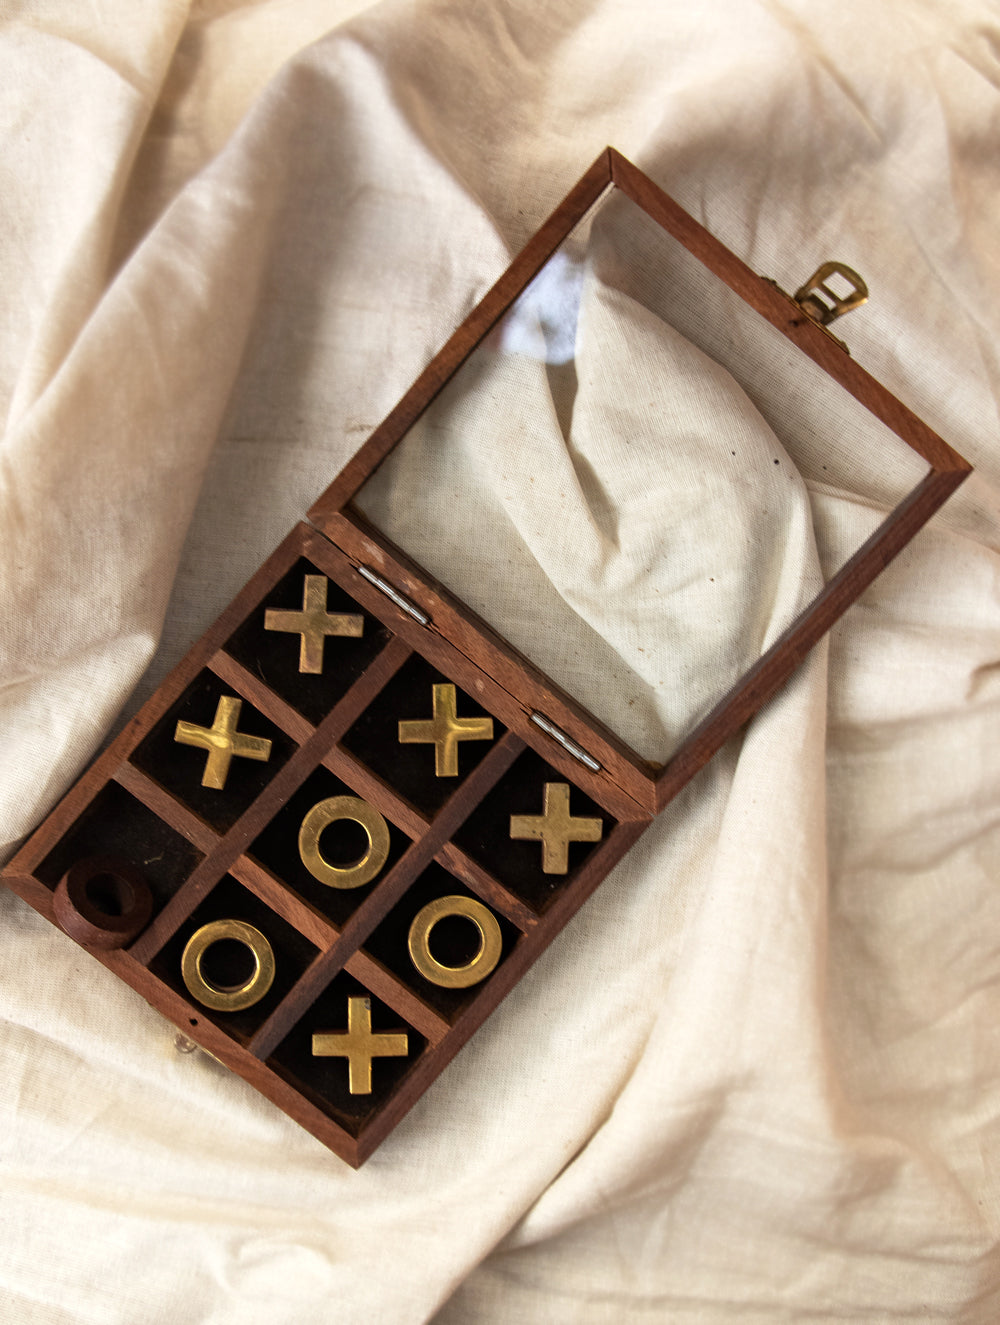 Load image into Gallery viewer, Handcrafted Wood &amp; Brass Tic Tac Toe Game With Box